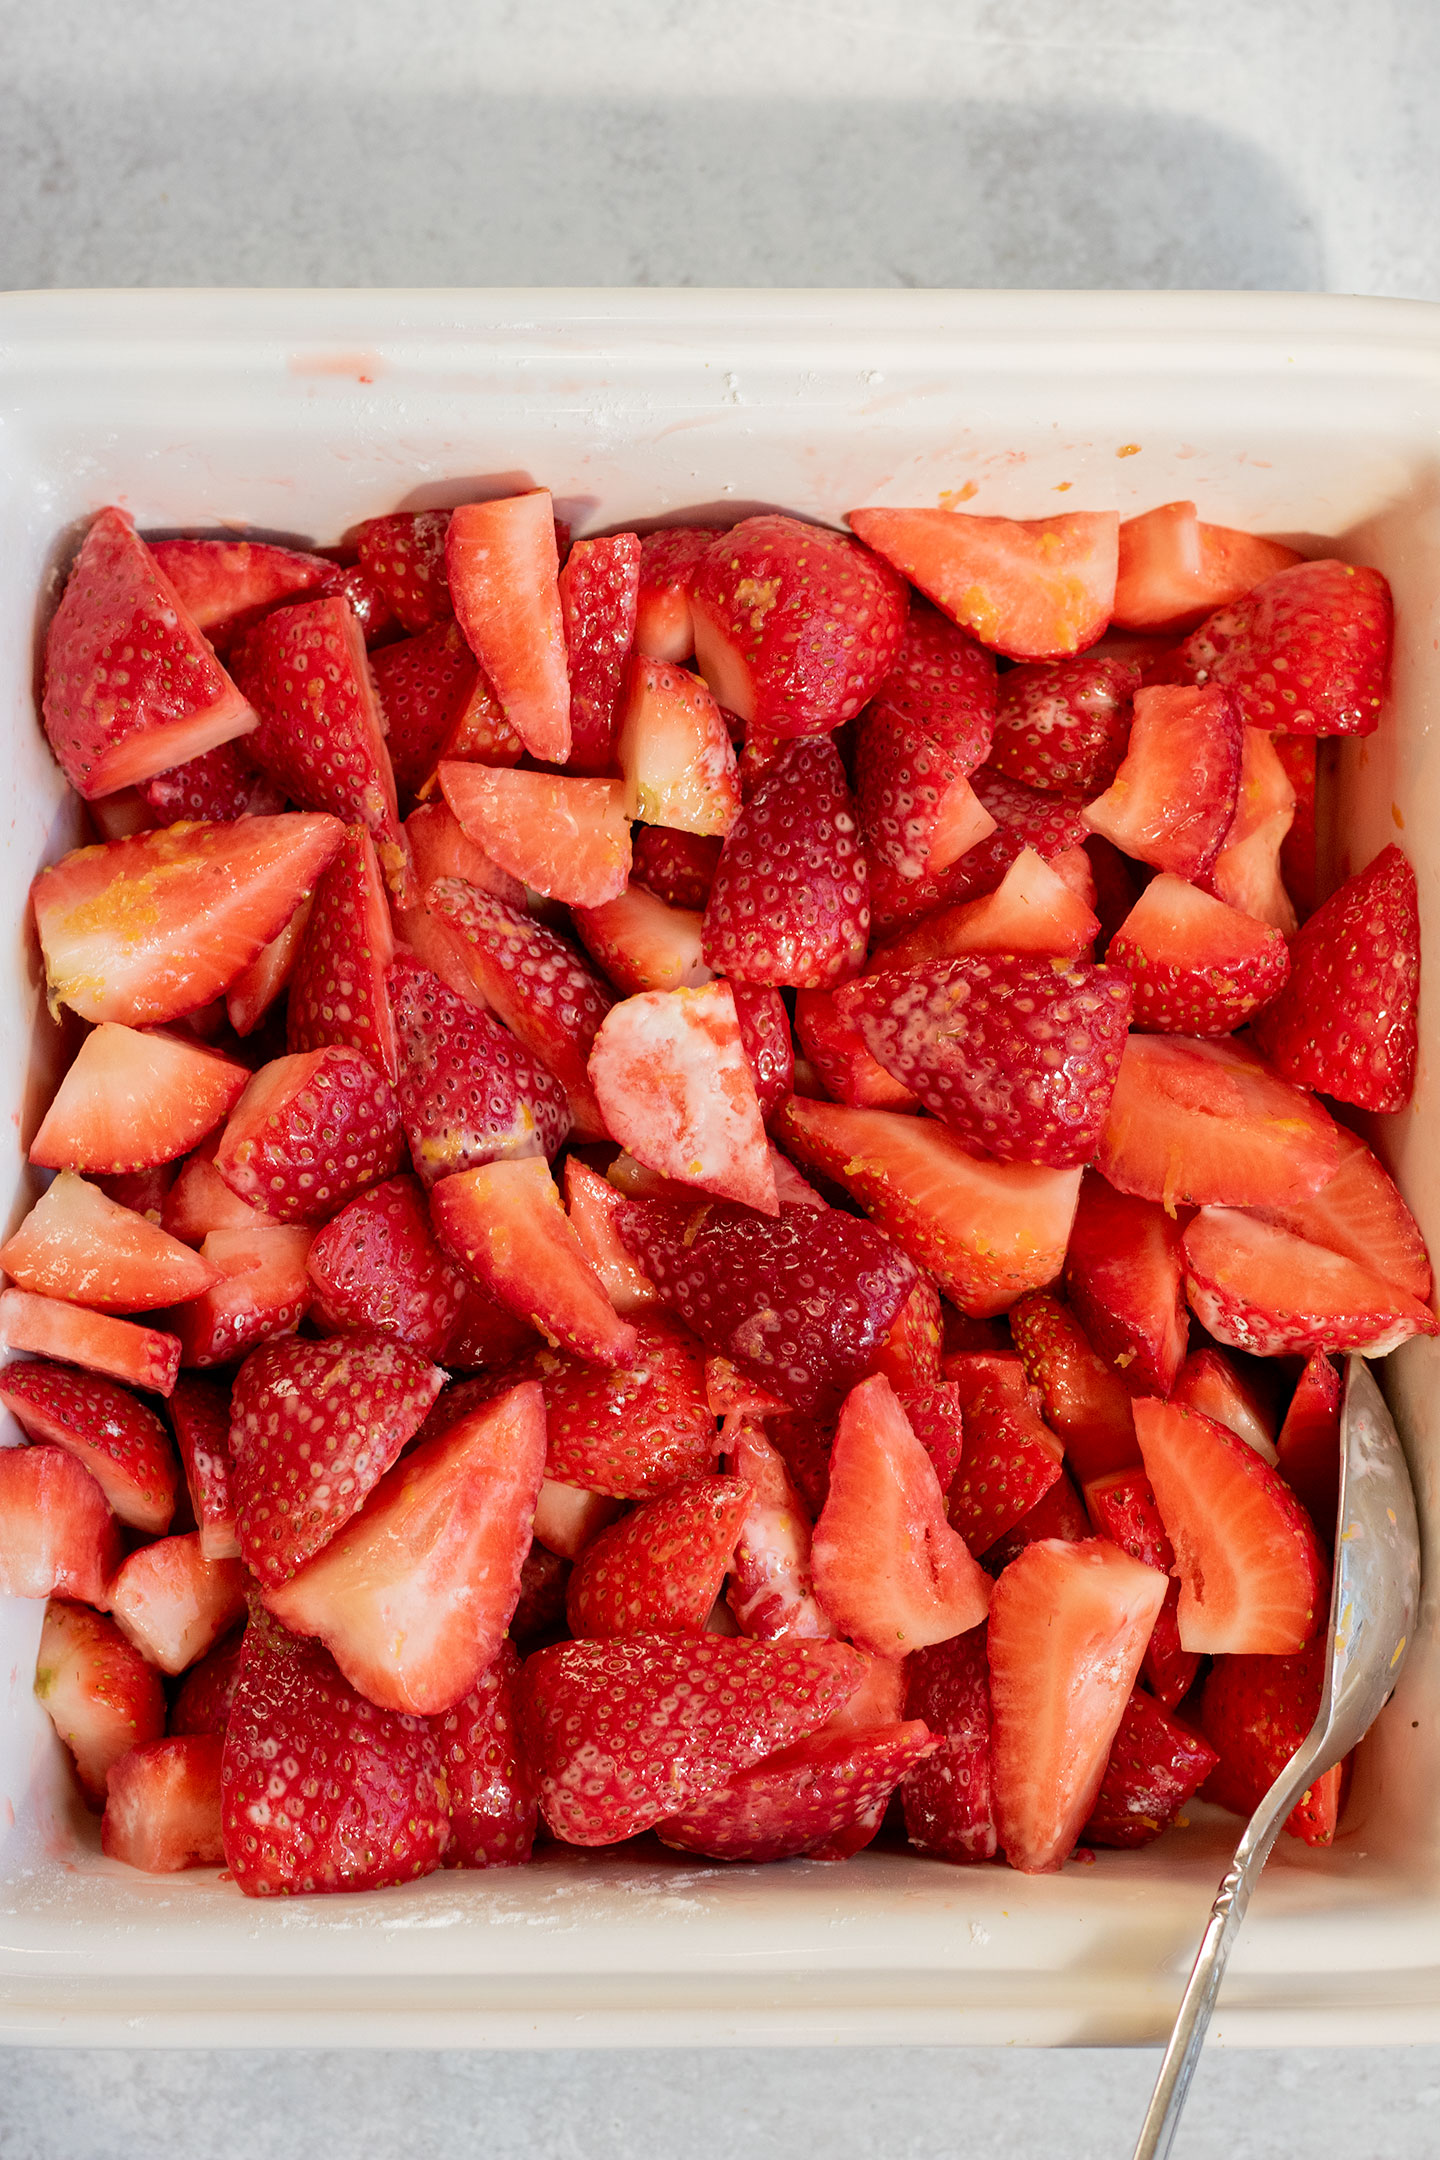 Tossing the strawberries together with lemon and cornstarch in a ceramic baking dish.